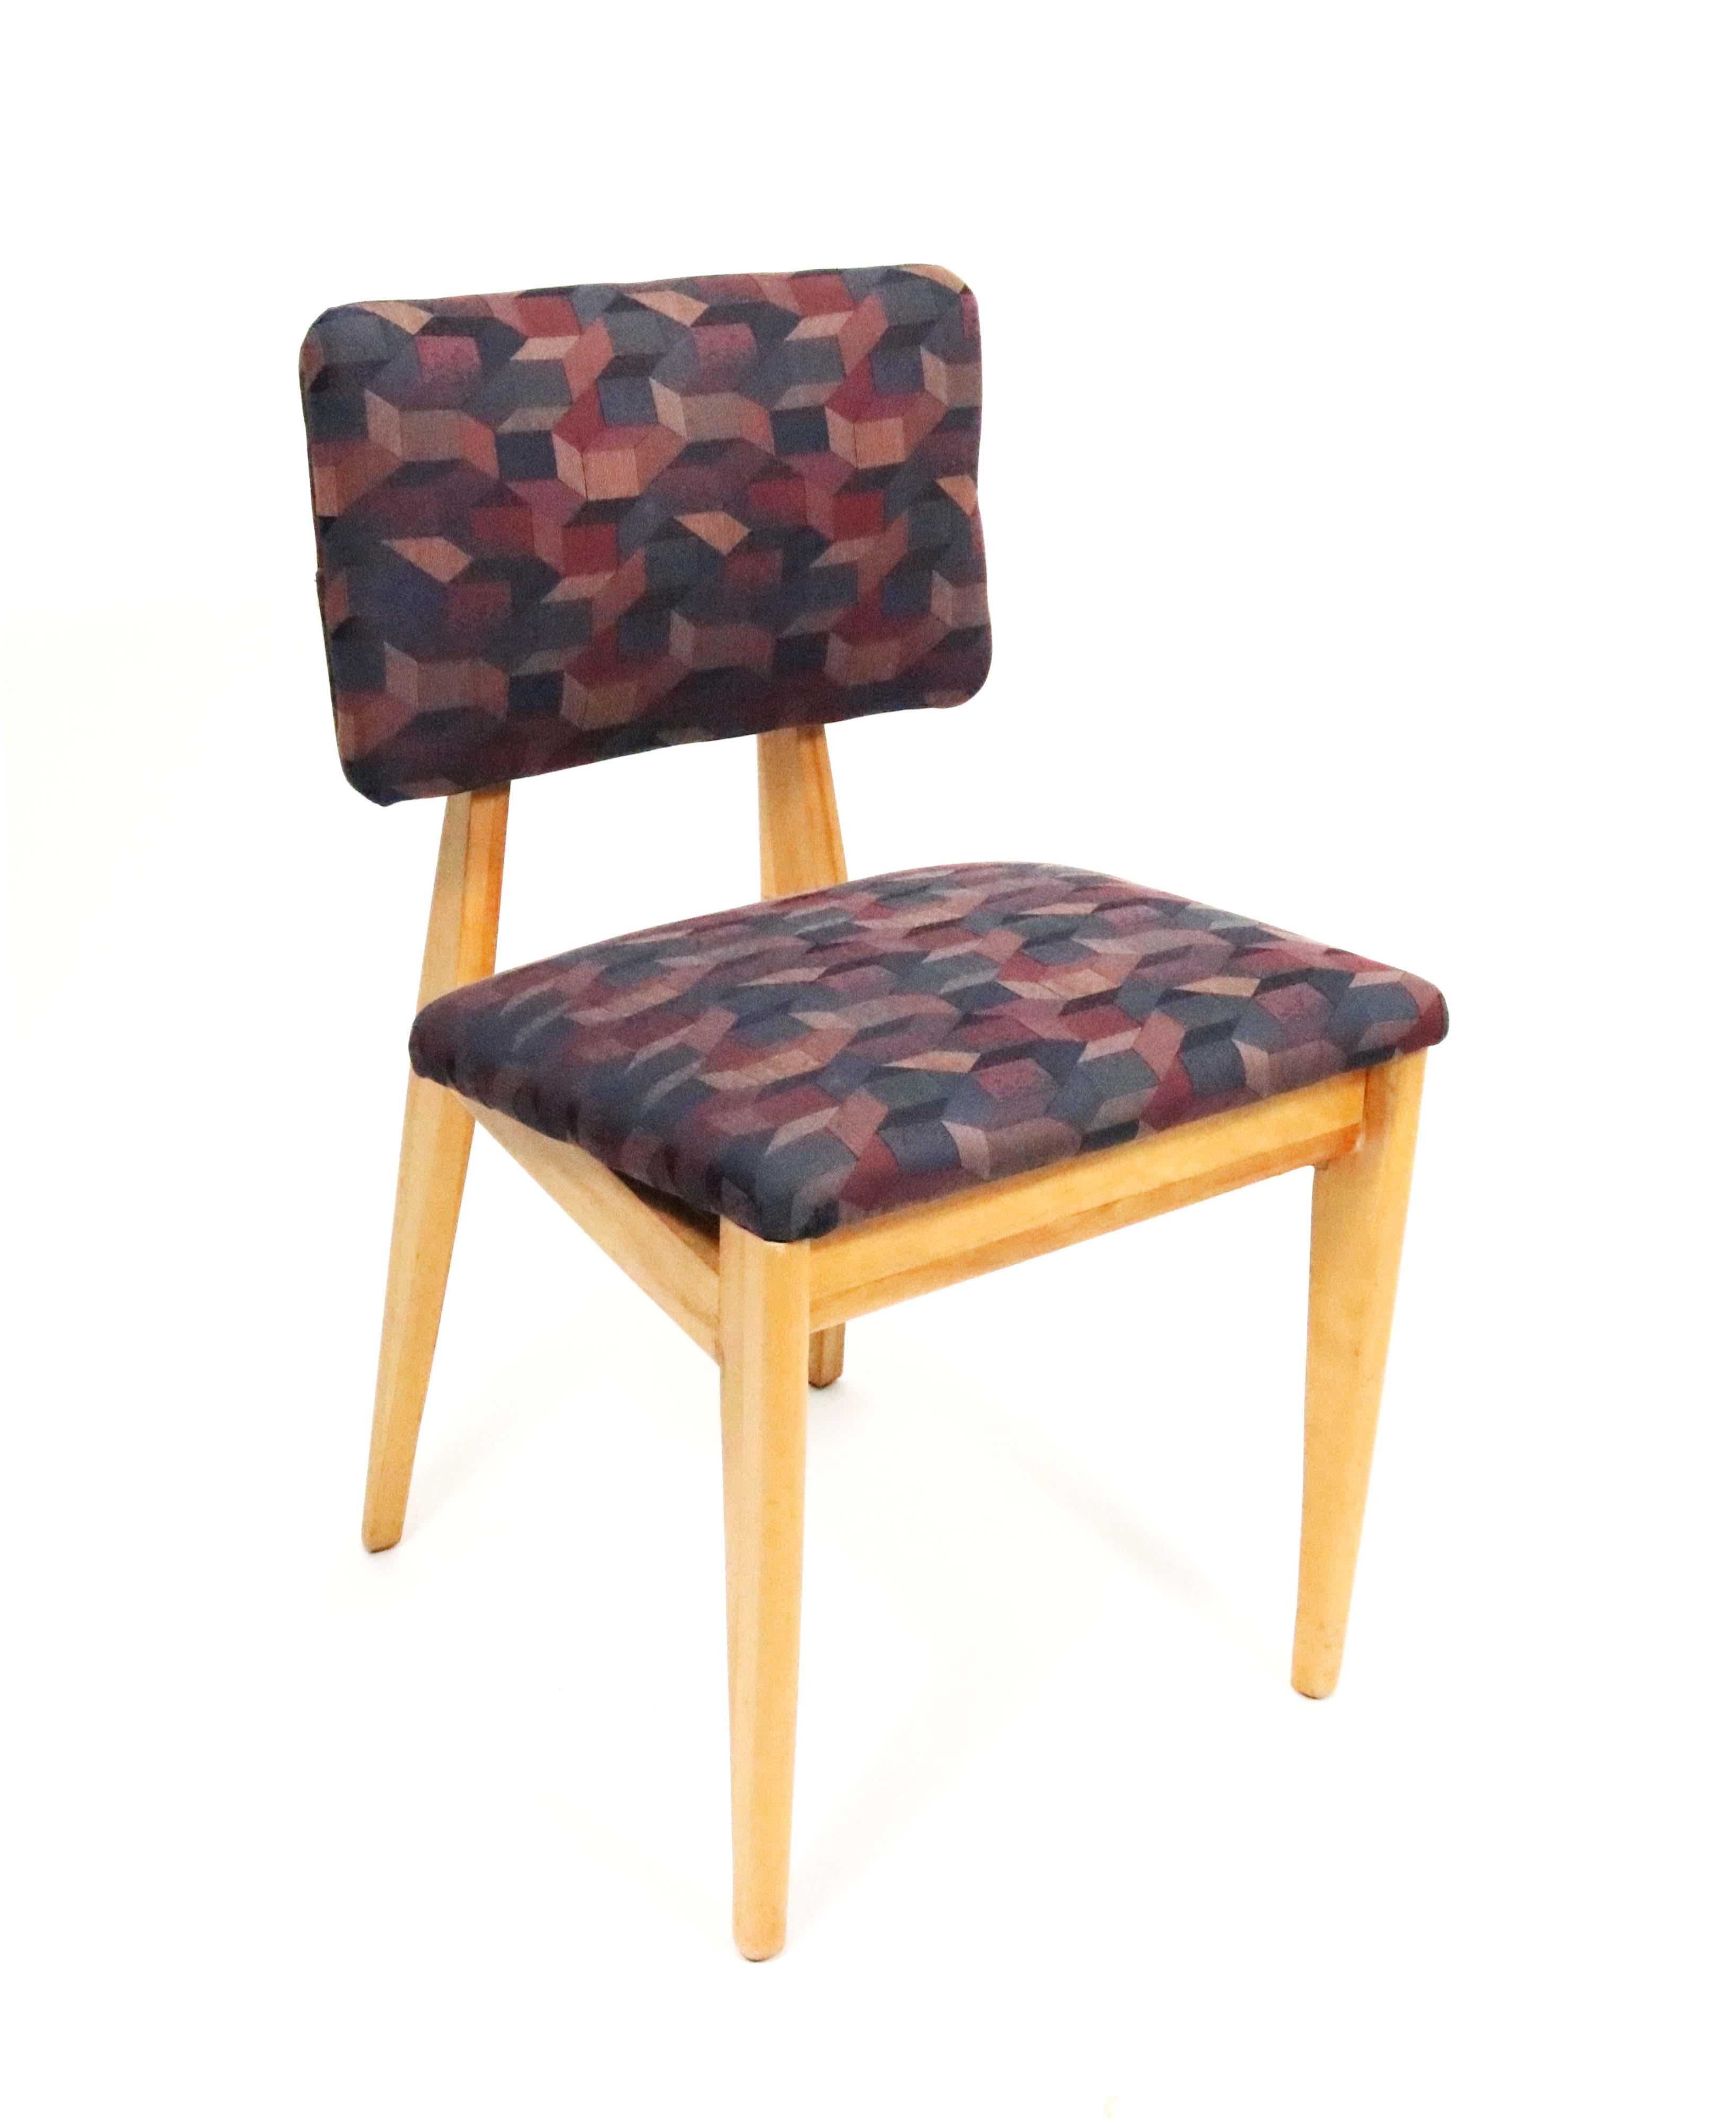 A rare birch dining or desk chair by Ernest Farmer of George Nelson and Associates for Herman Miller.

Professional reupholstery available at pass-through cost.